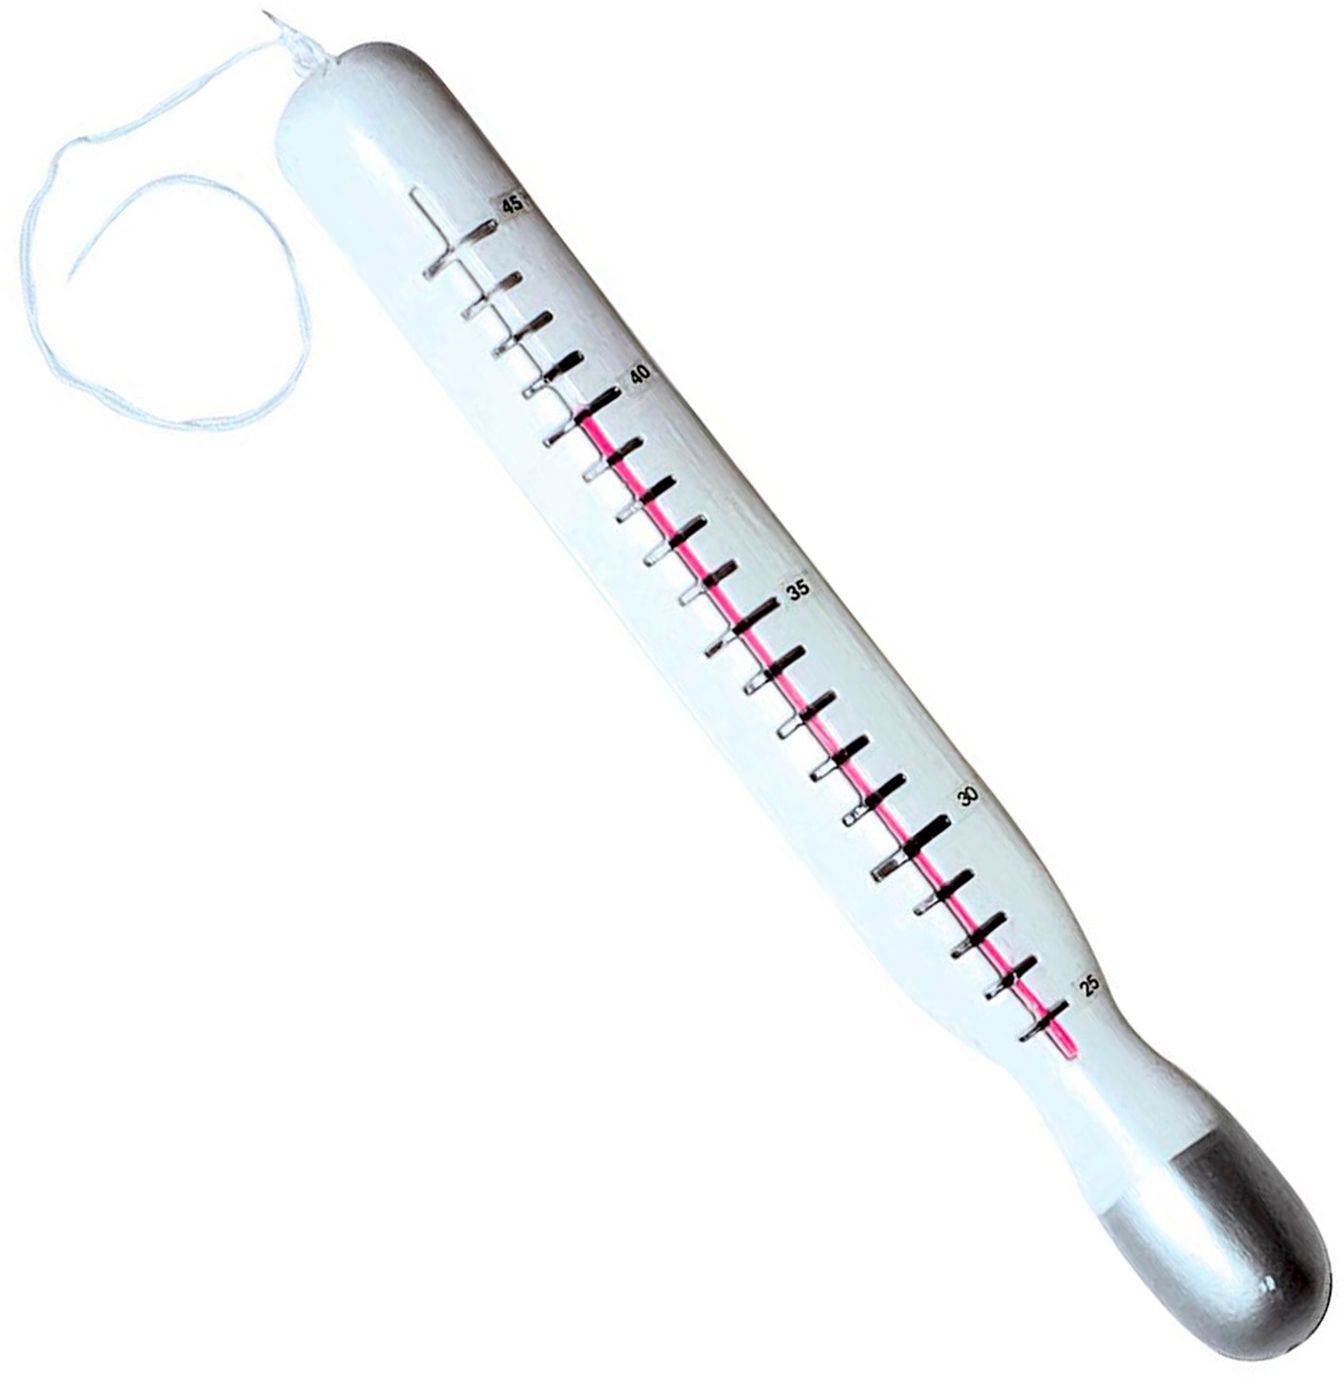 Grote verpleegsters thermometer